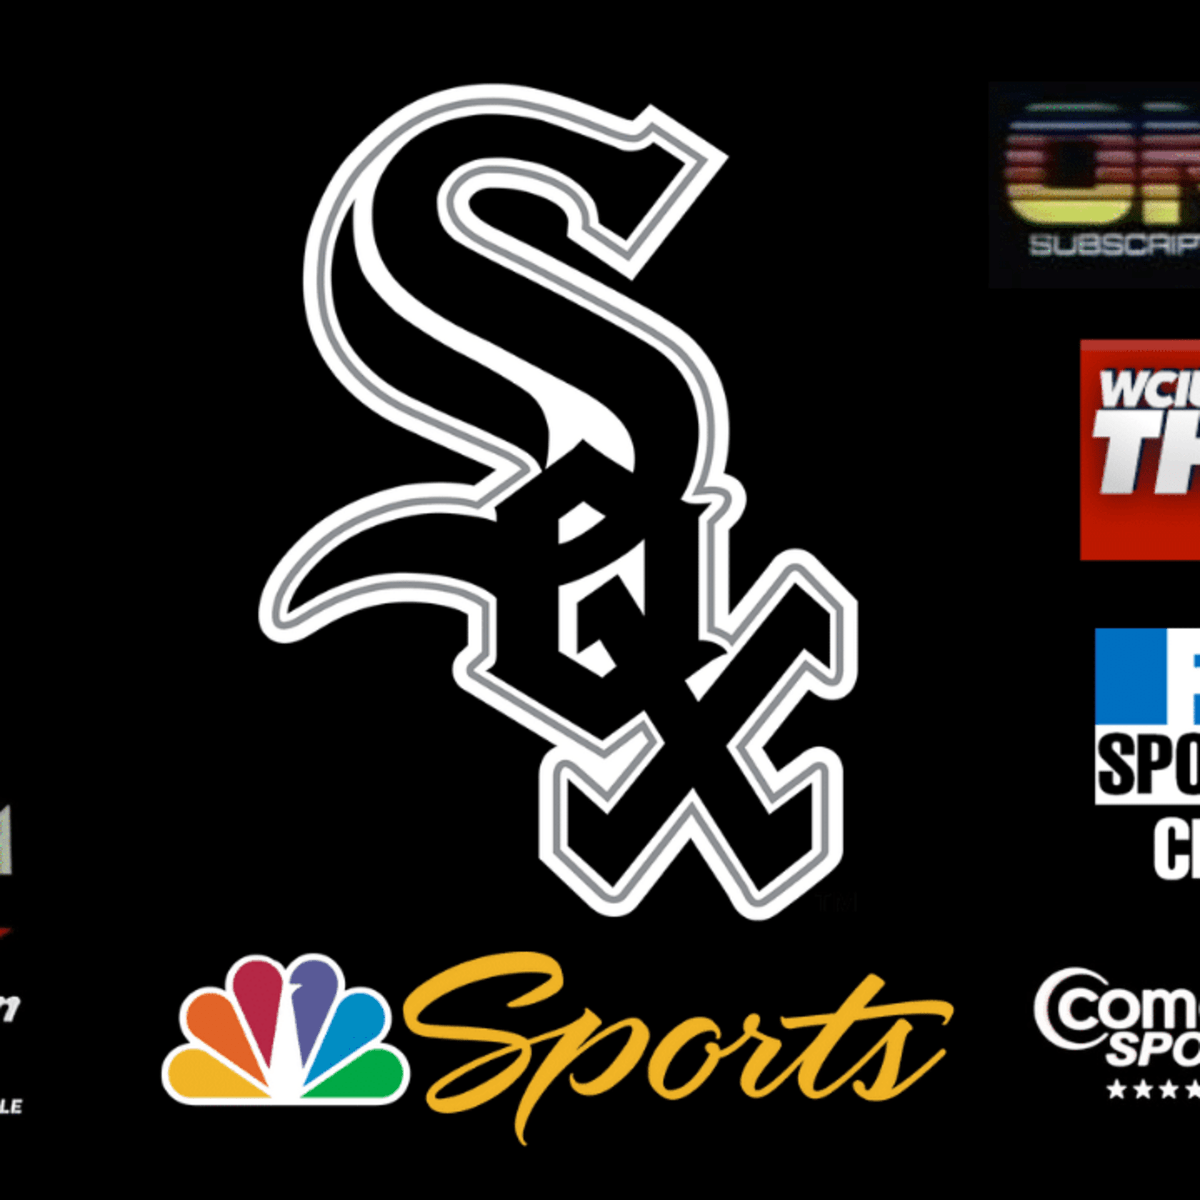 The White Sox broadcast keeping the viewers in the know about